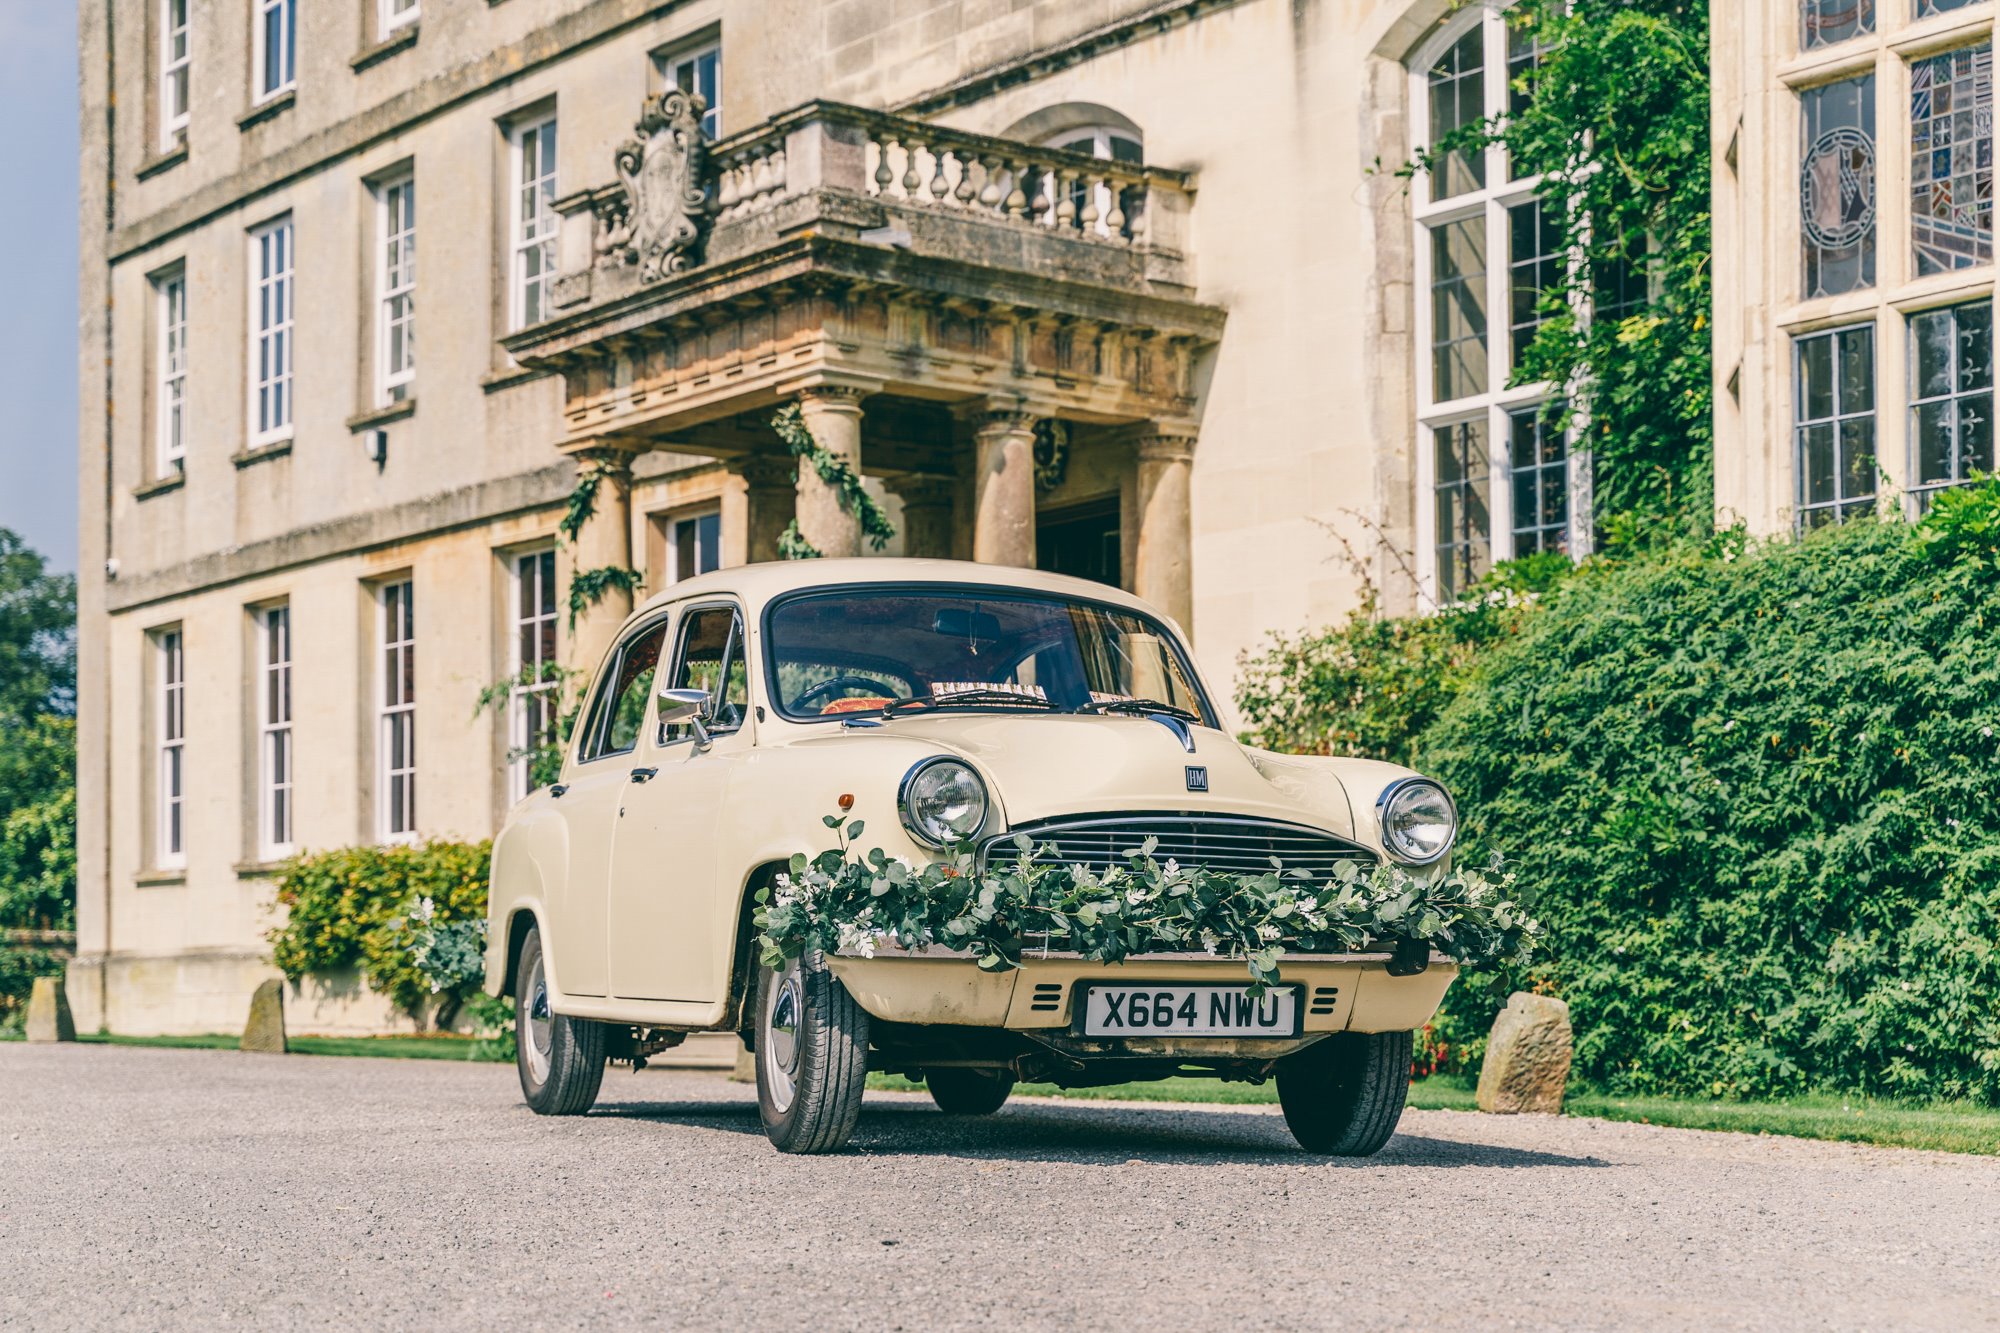 Vintage ambassador car decorated with foliage in front of mansion house elmore court for a garden party wedding